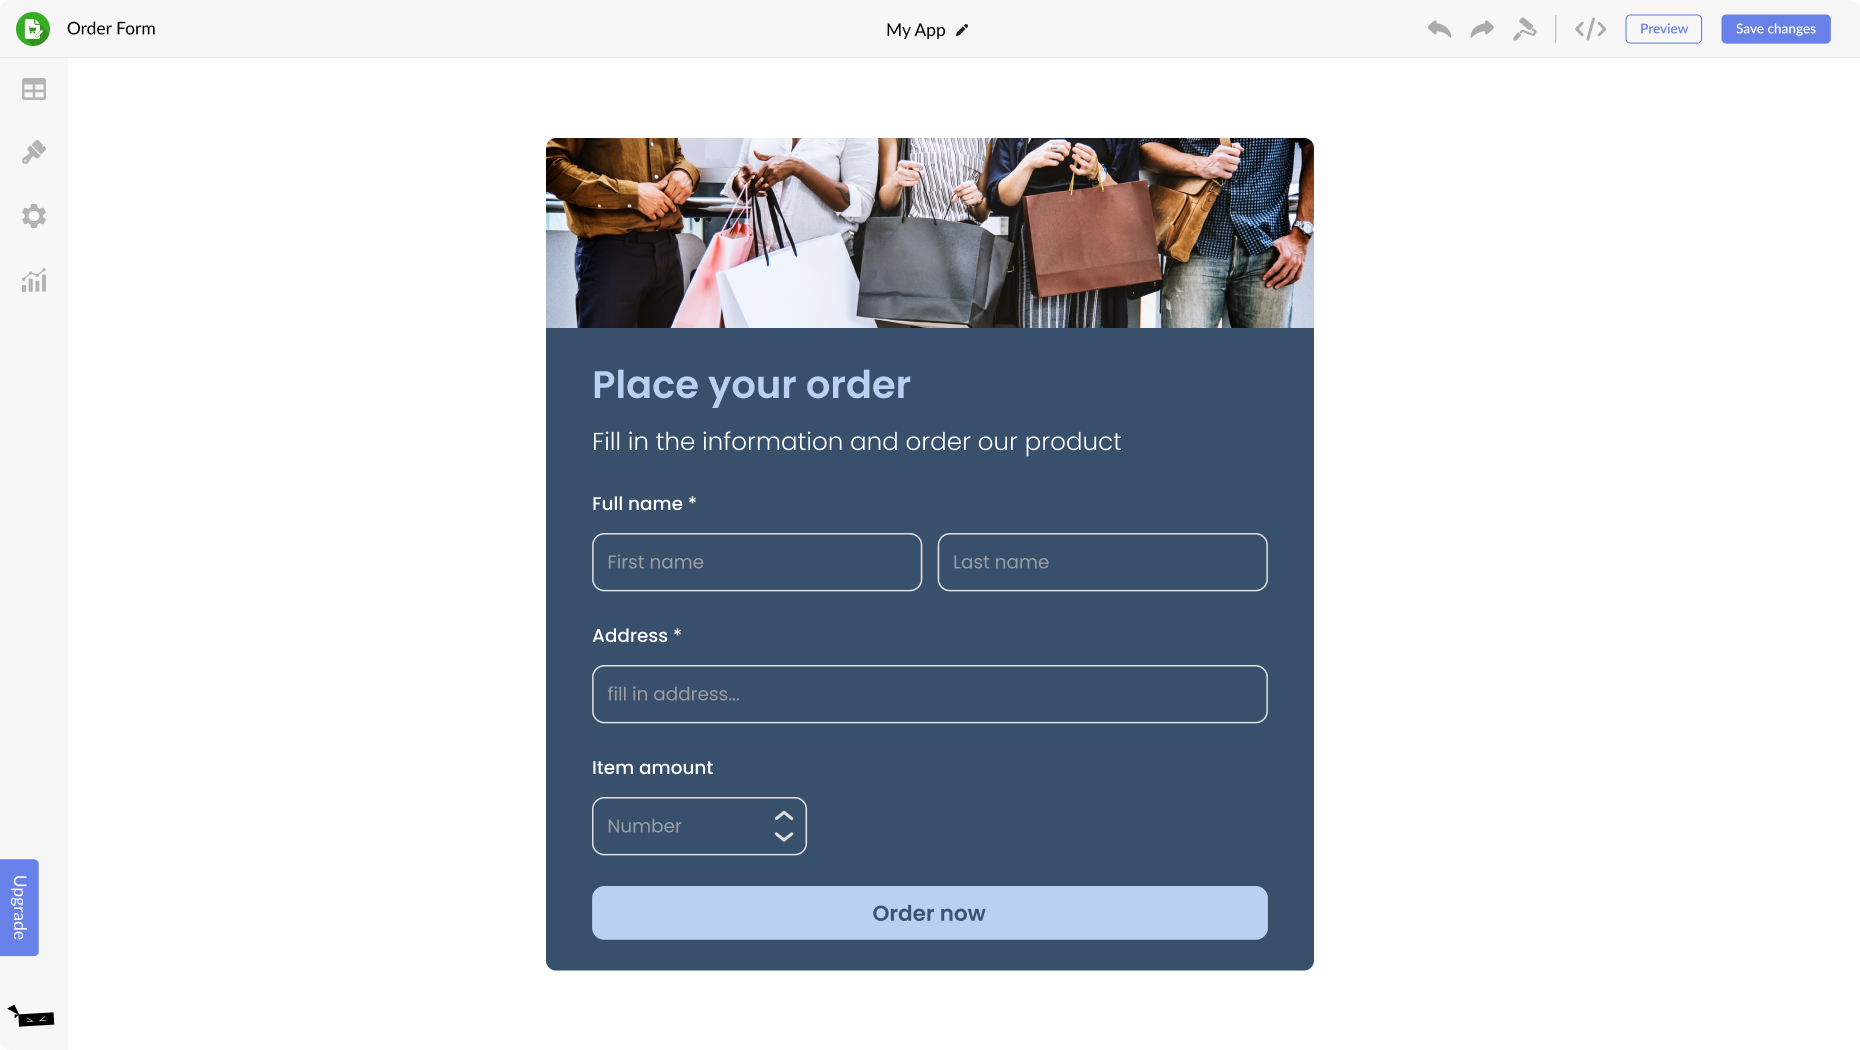 Order Form for eZee Panorama